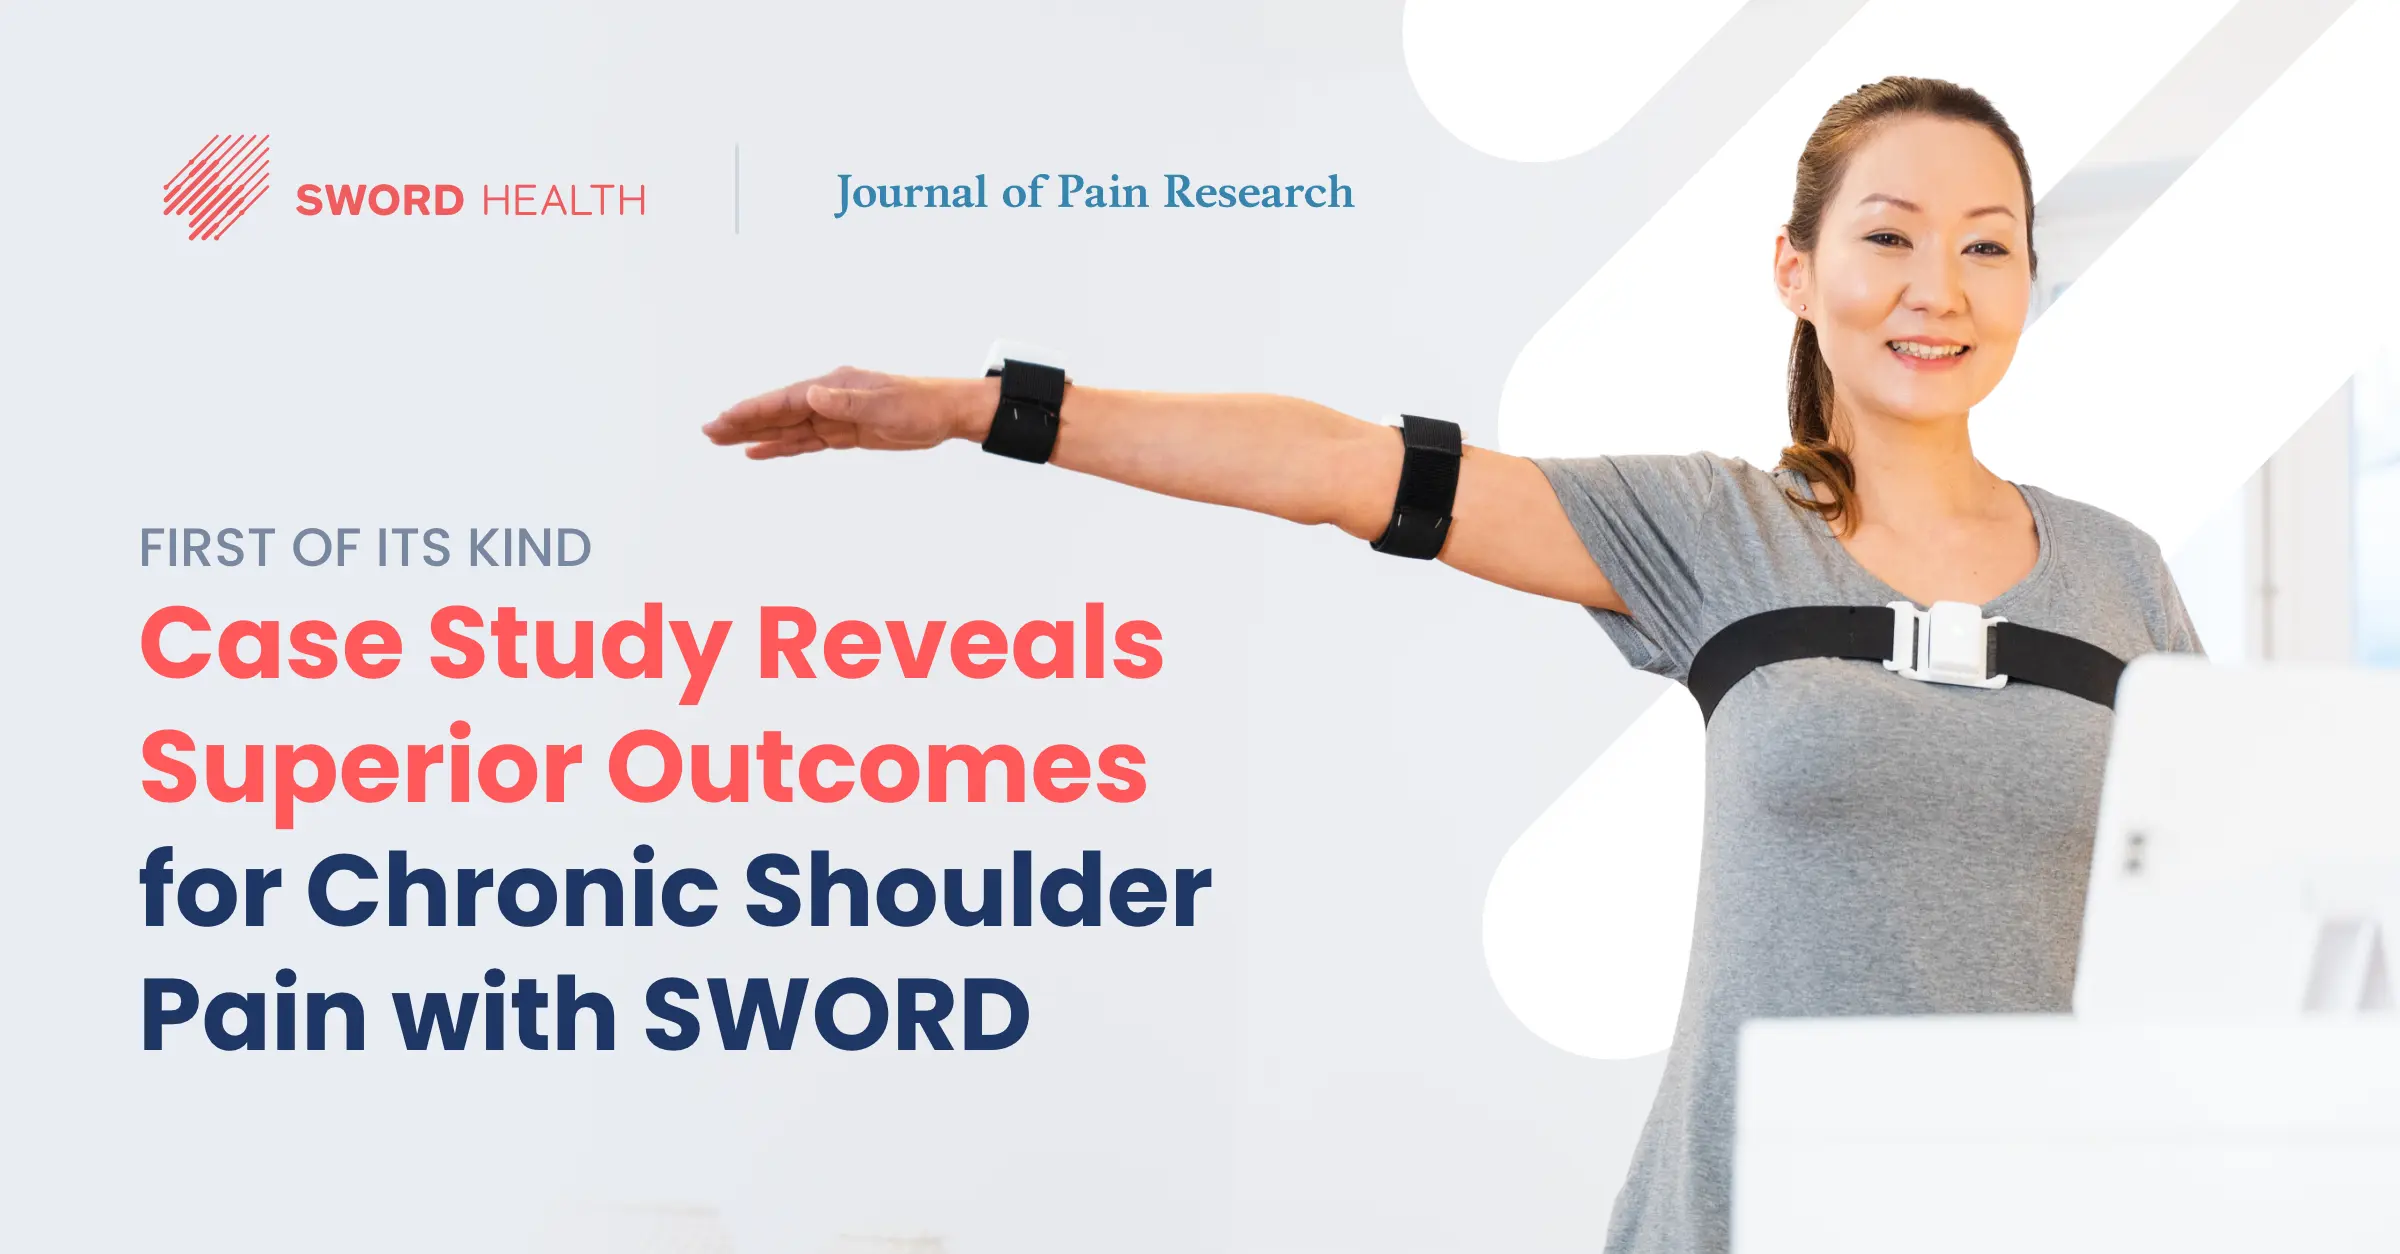 Case study reveals superior outcomes for chronic shoulder pain with the Sword program